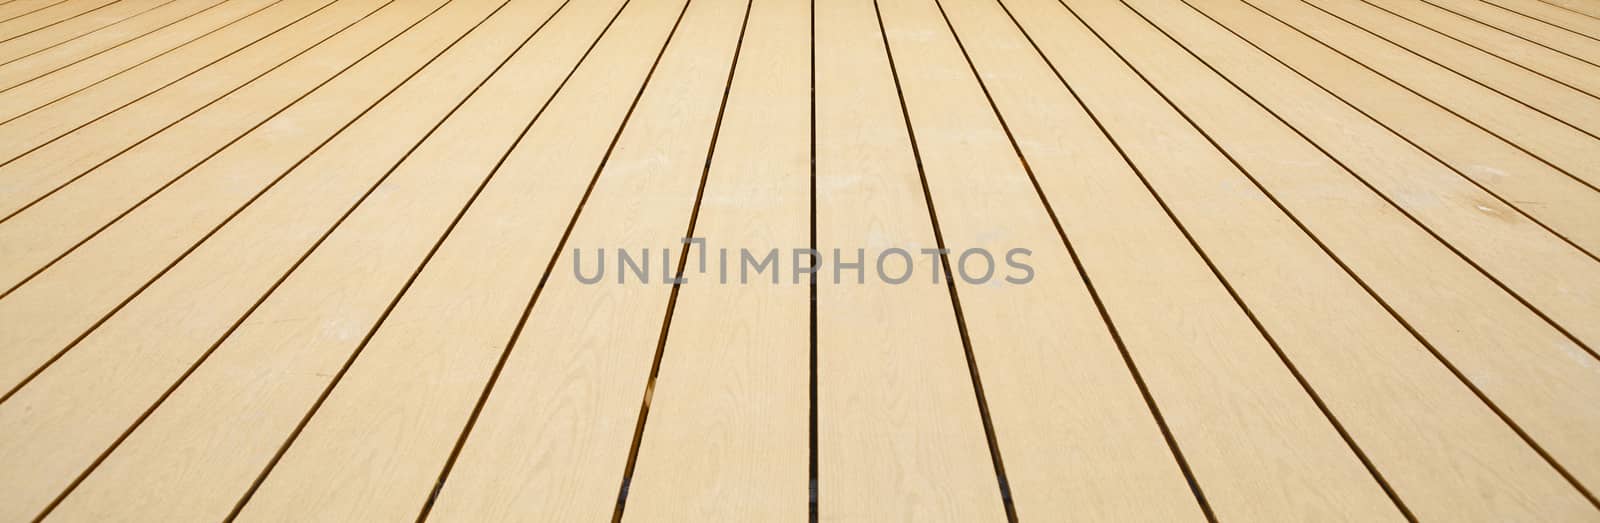 Abstract Background Wooden Floor,Wooden plank pattern texture background.